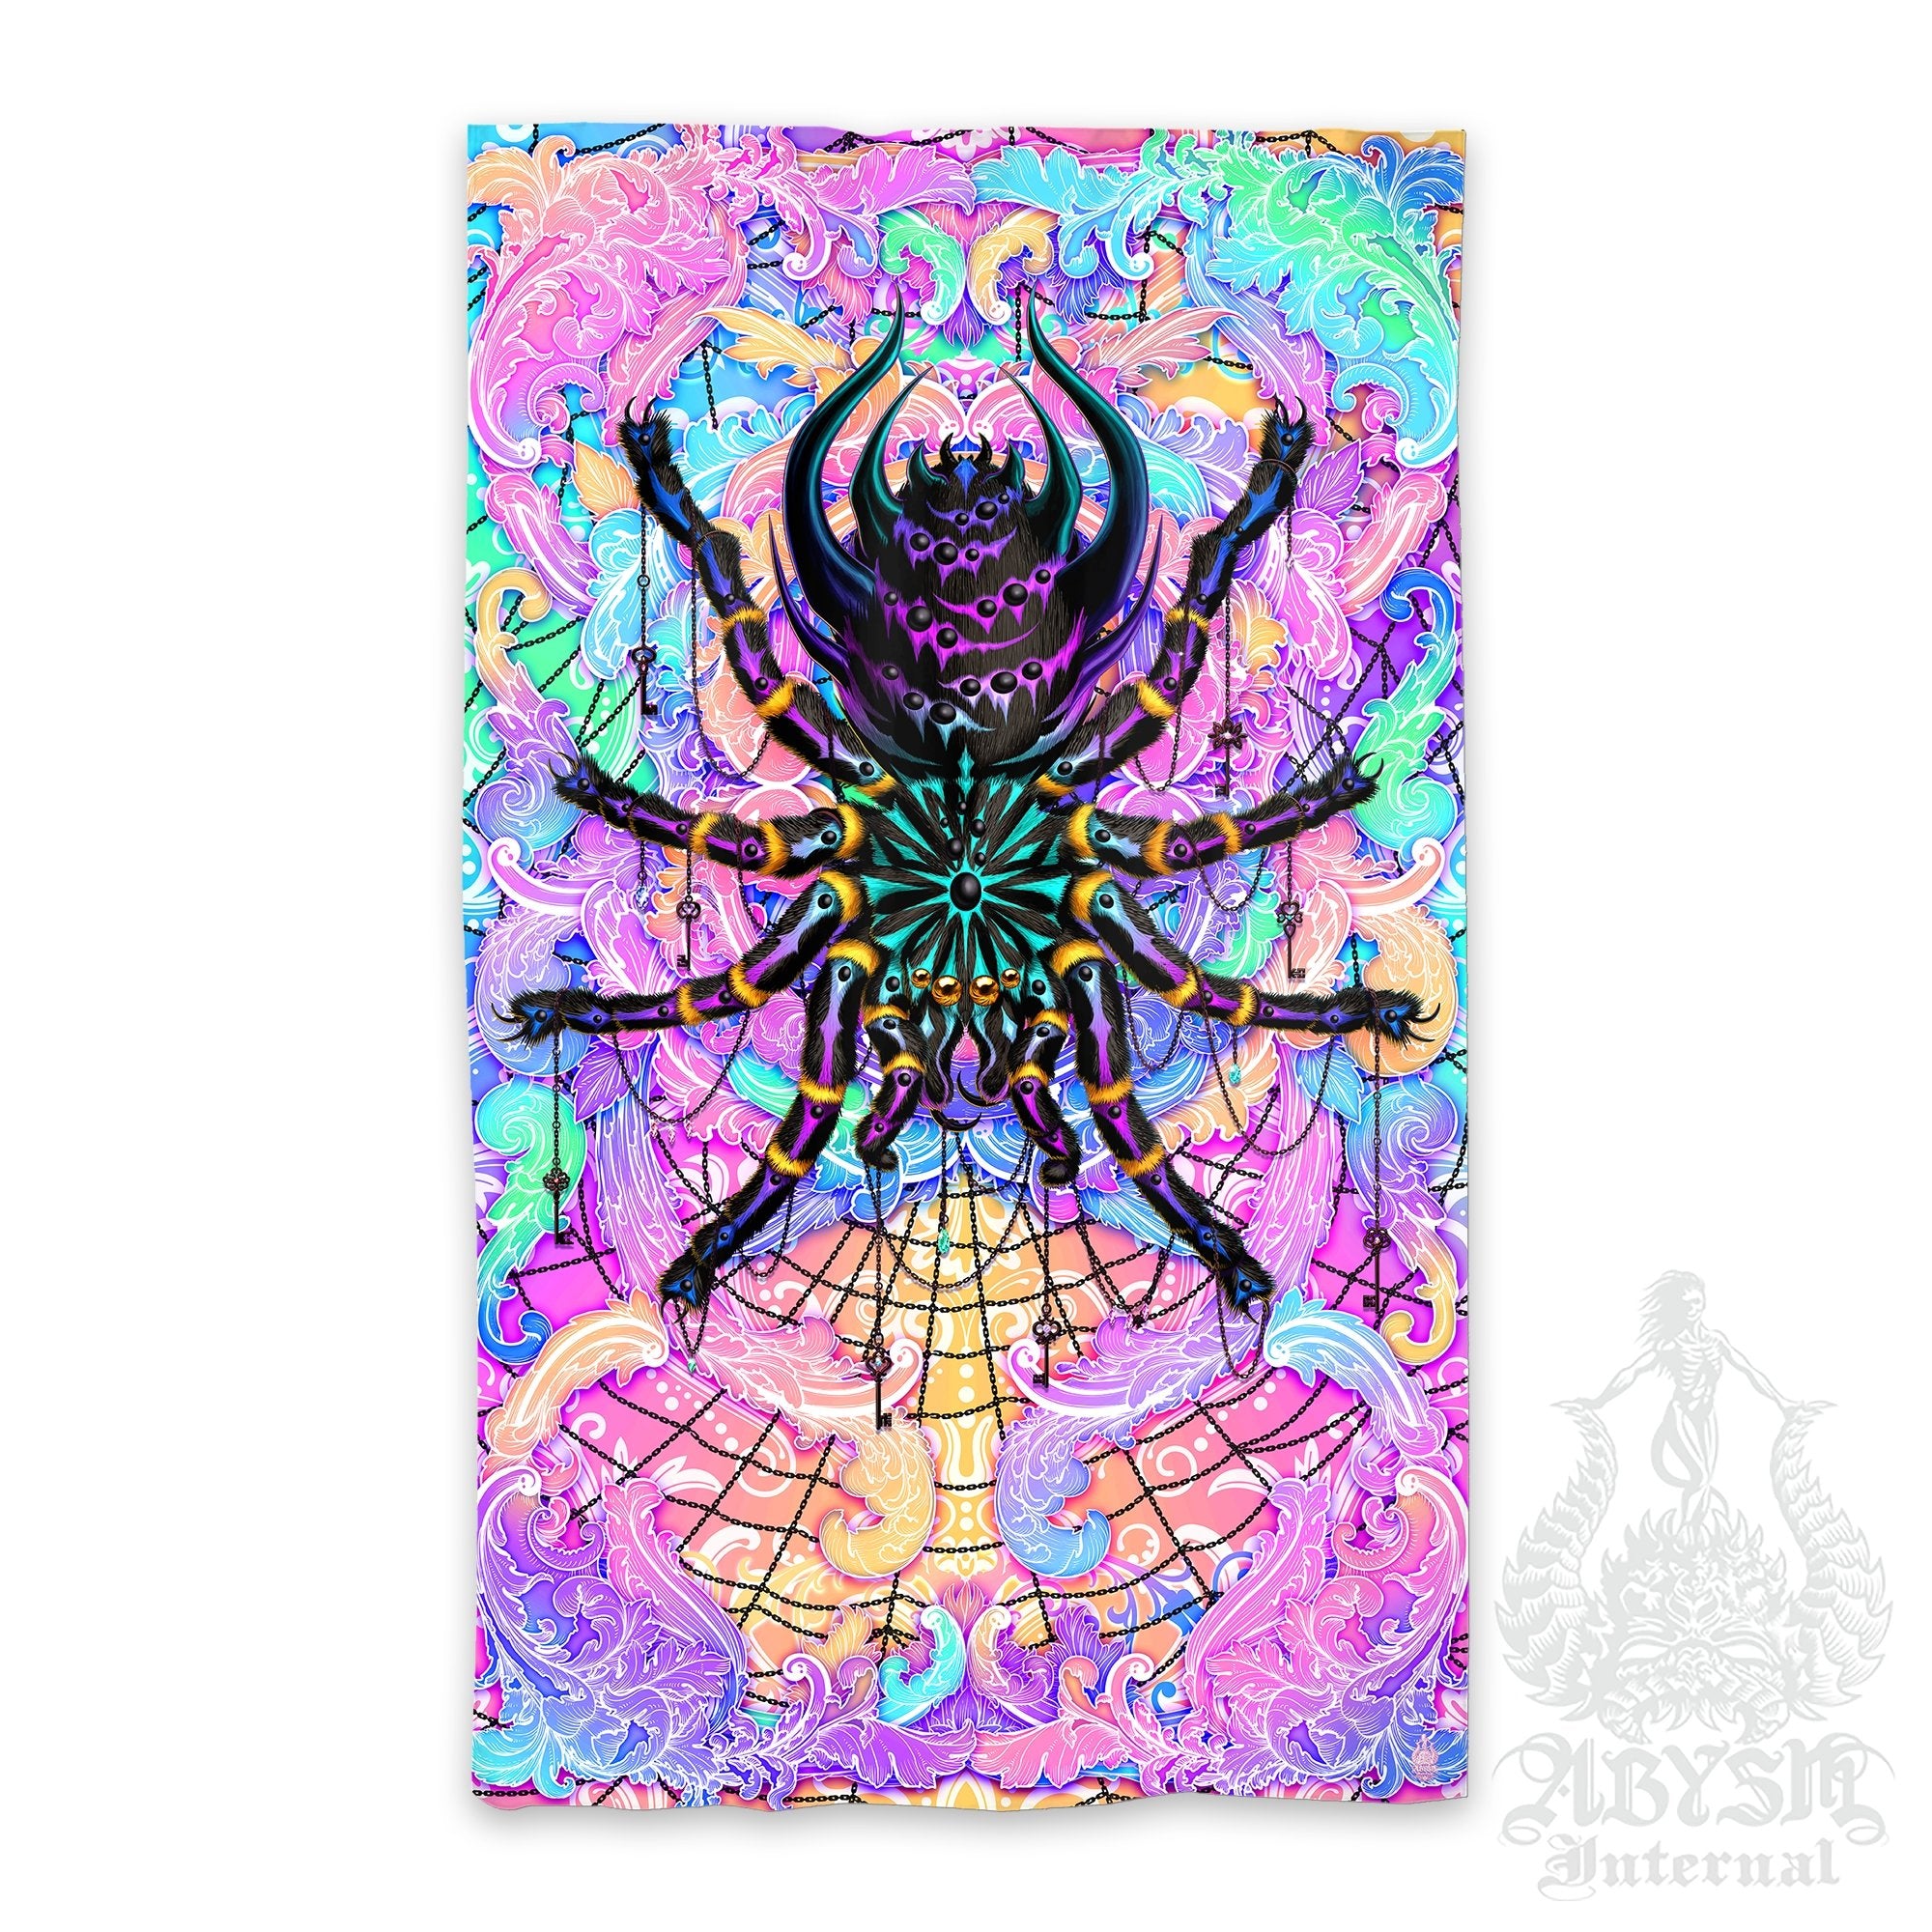 Pastel Punk Black Blackout Curtains, Long Window Panels, Psychedelic Art Print, Kawaii Gamer Room Decor, Funky and Eclectic Home Decor - Tarantula, Aesthetic Spider - Abysm Internal